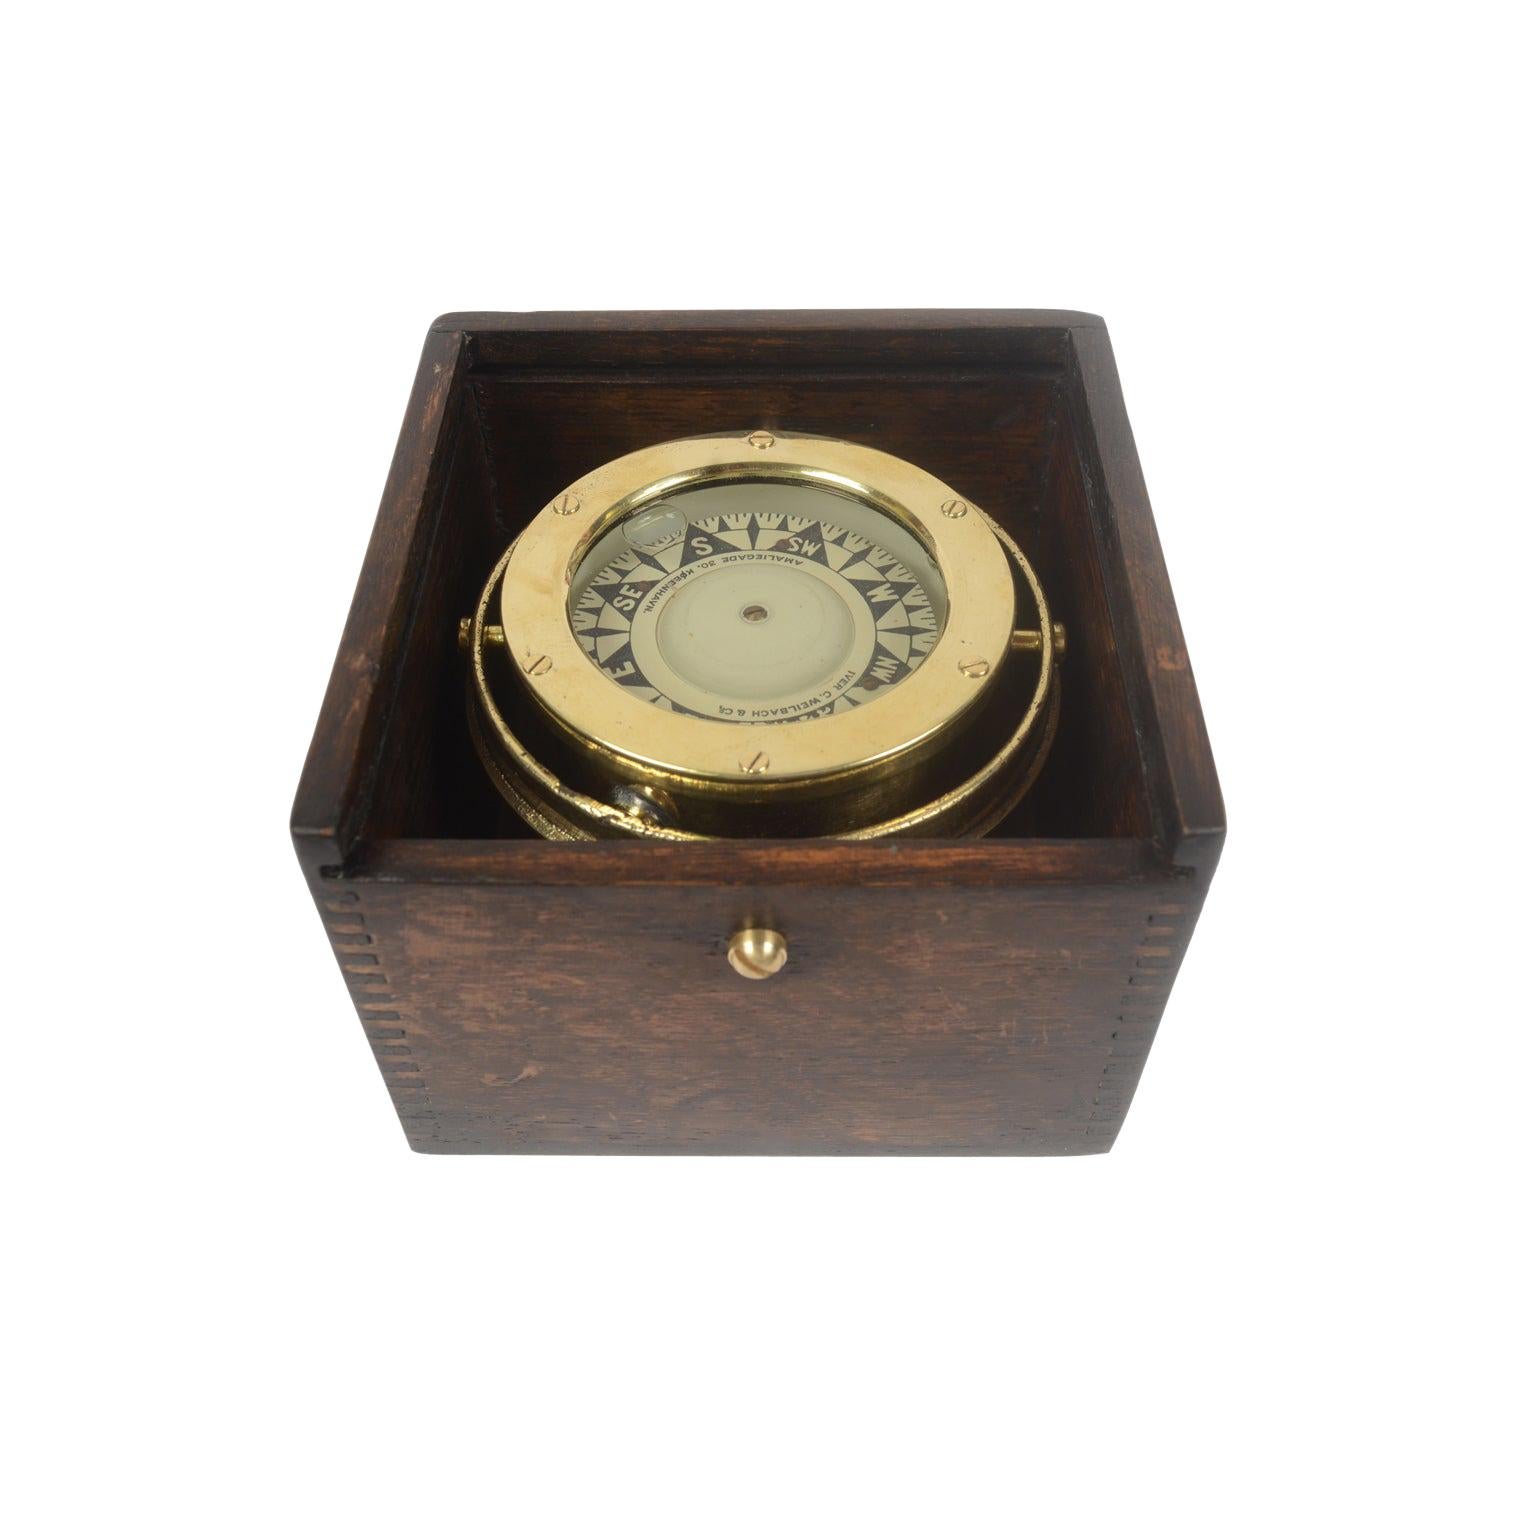 Details about   Antique Marine Brass Lonely Hearts Club Band Compass 2 Inch With Wooden Box Gift 